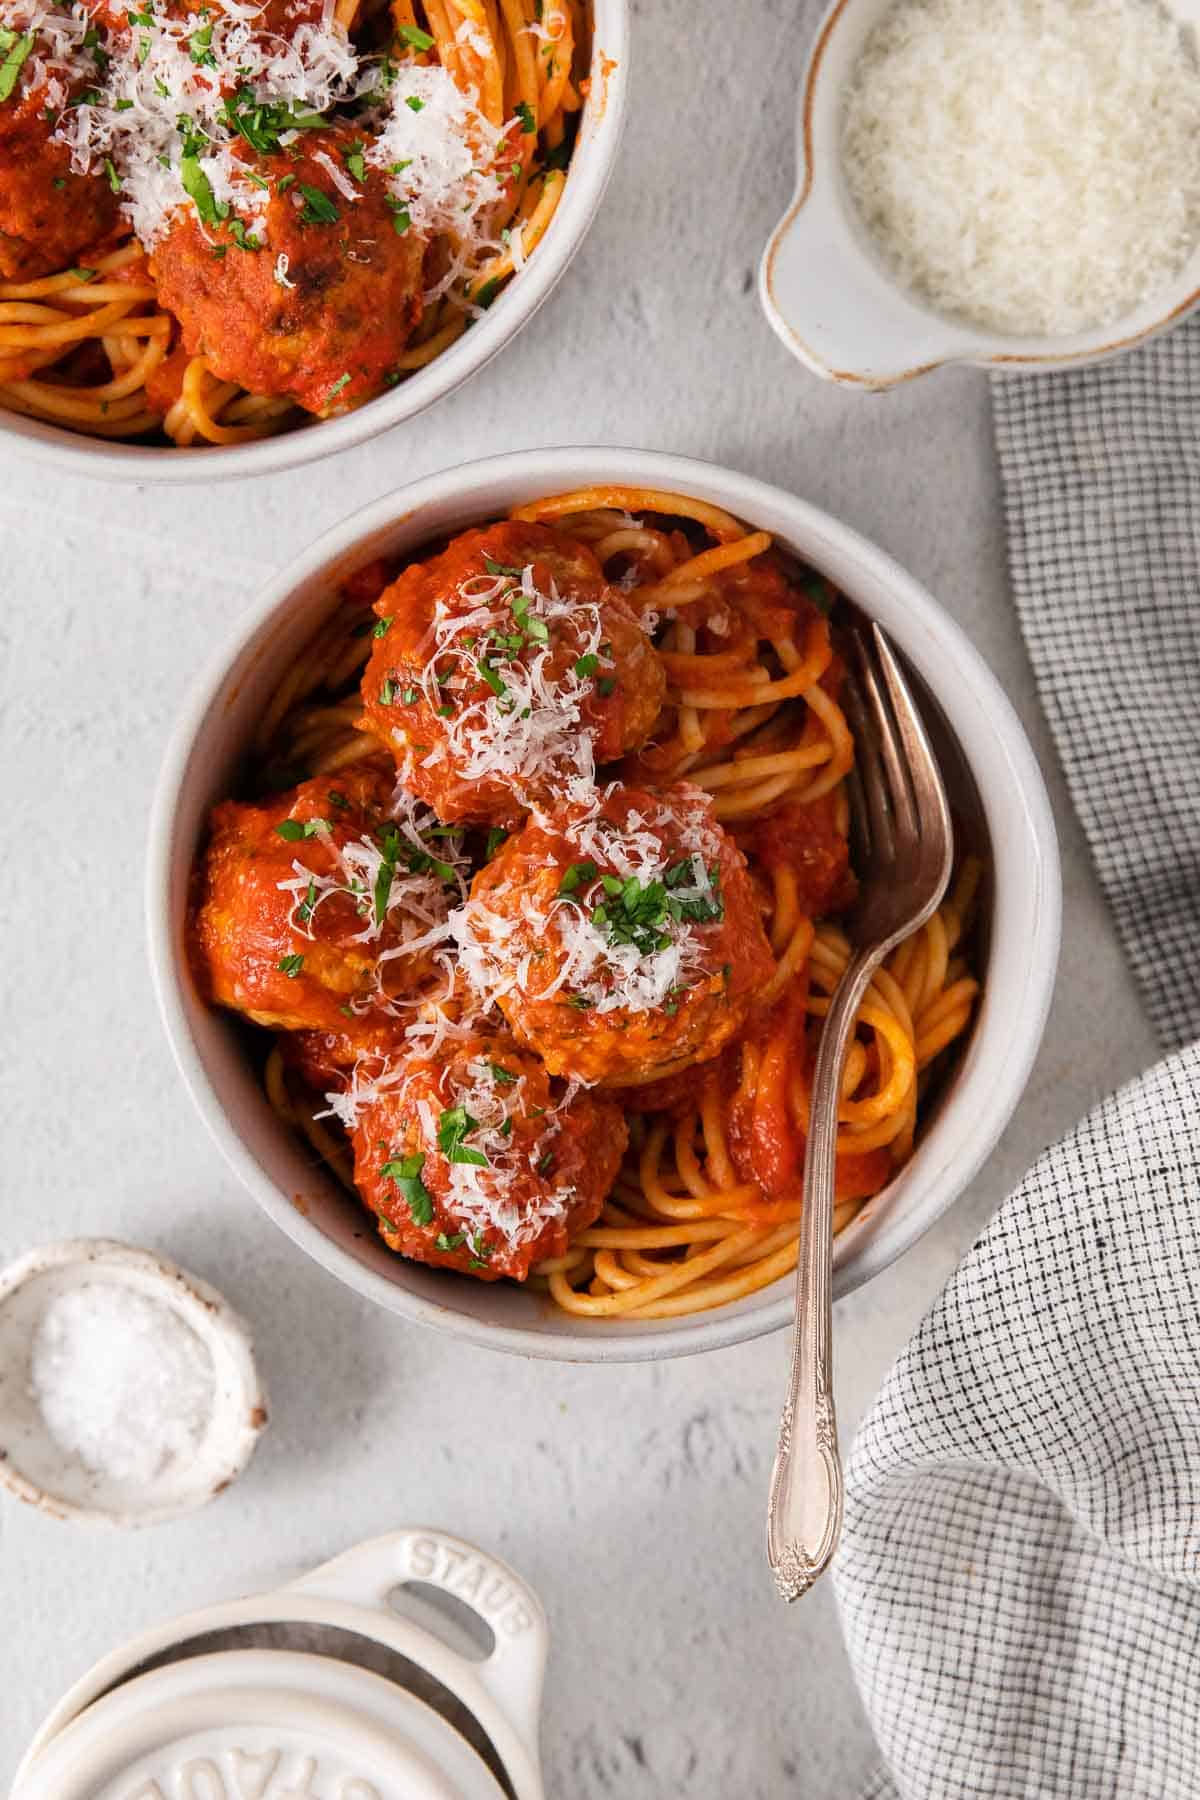 Gluten-free meatballs in a bowl with spaghetti and a fork